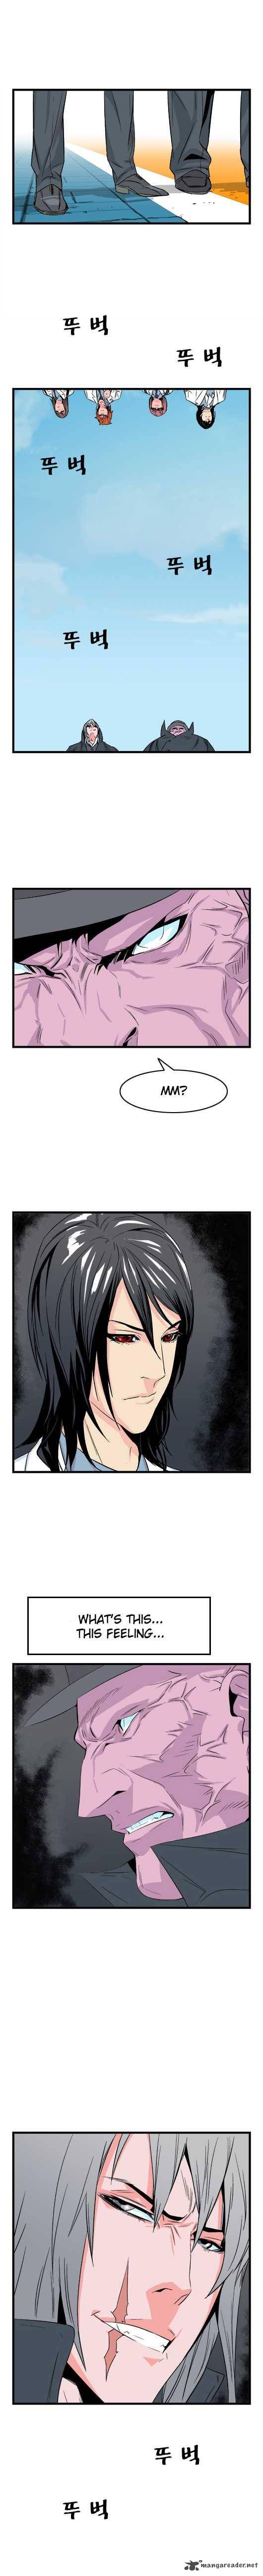 Noblesse 22 4